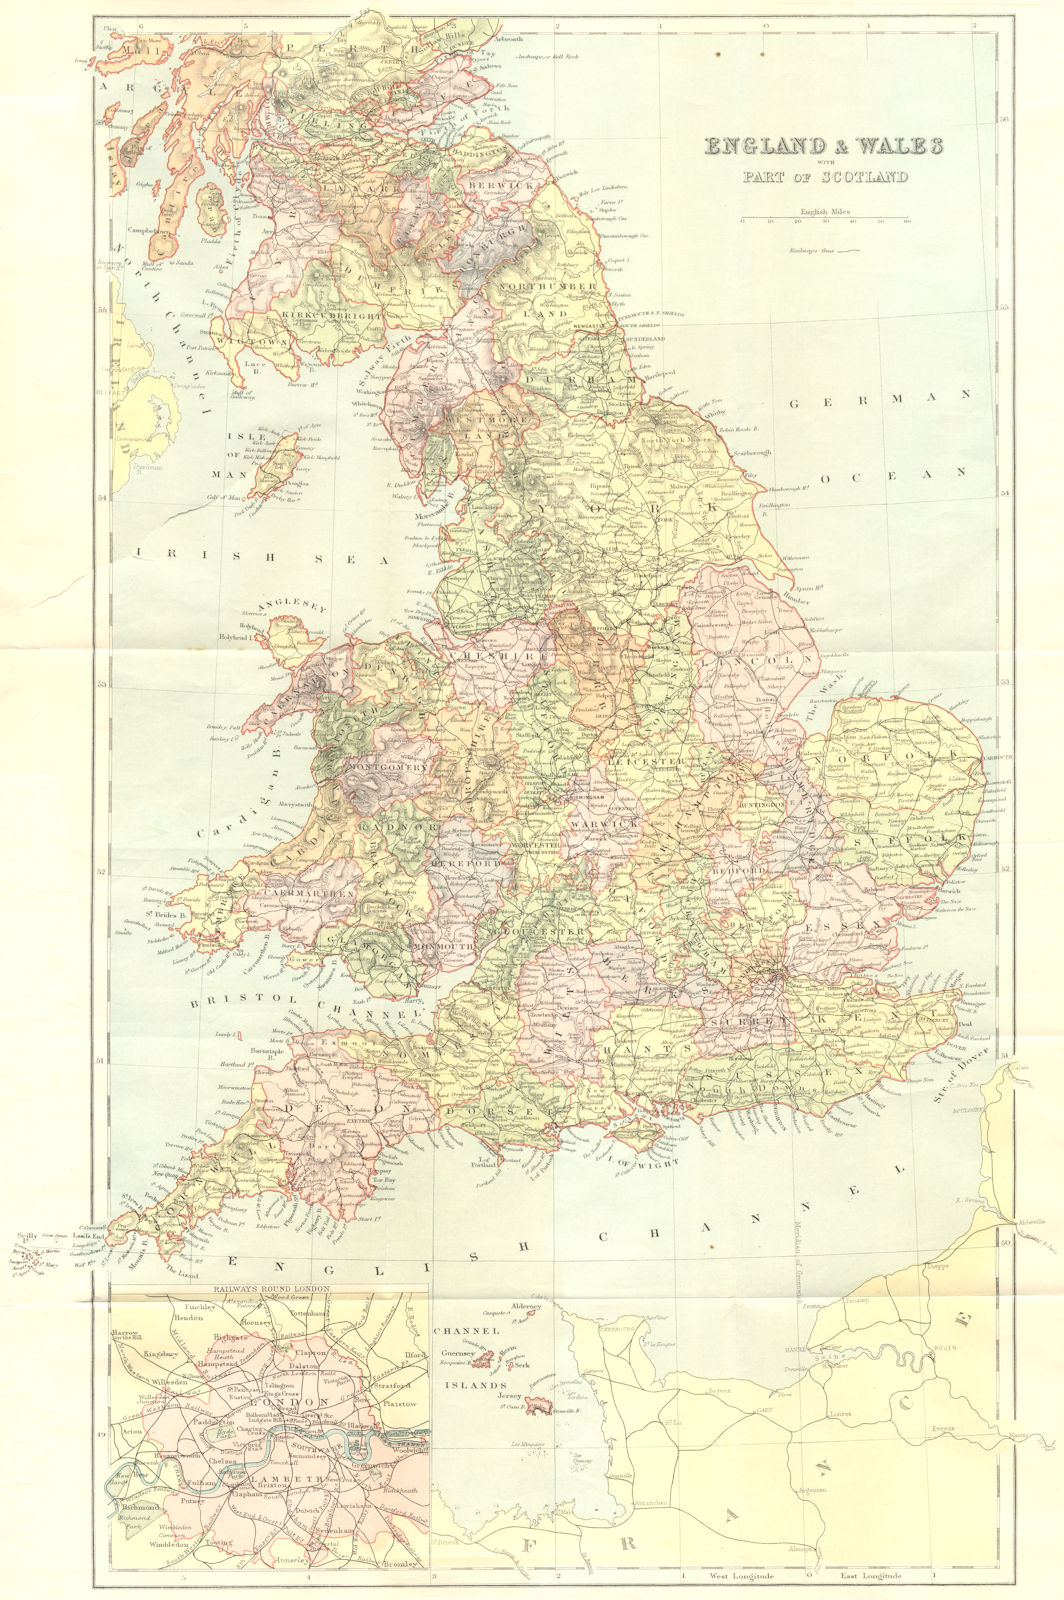 Associate Product ENGLAND WALES. Brabner Weller London inset 1895 old antique map plan chart